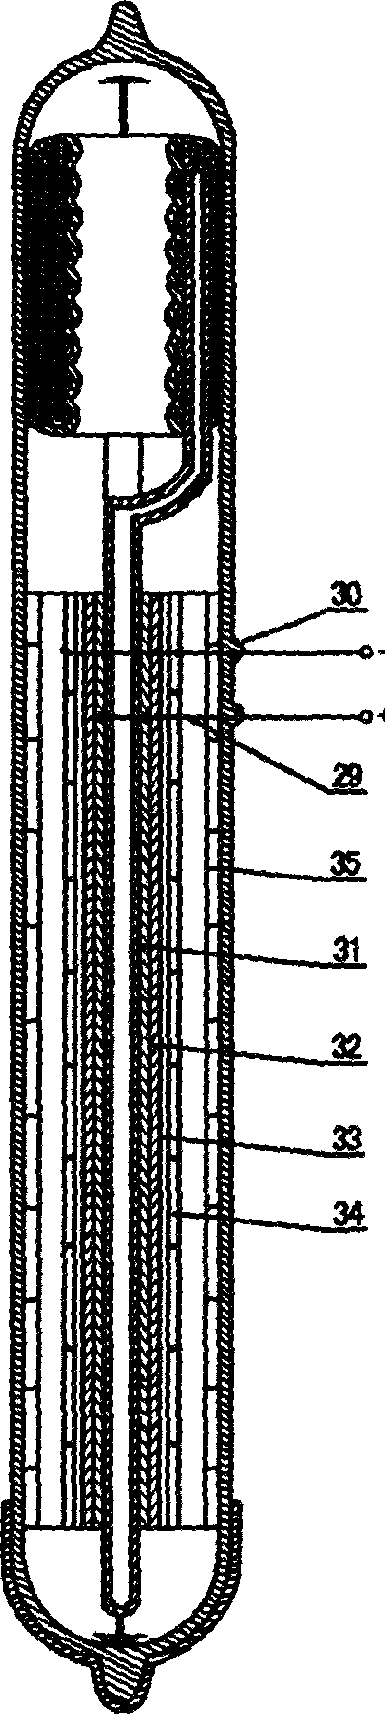 Vacuum solar transduction heat pipe structured in all glass body case and manufacturing method